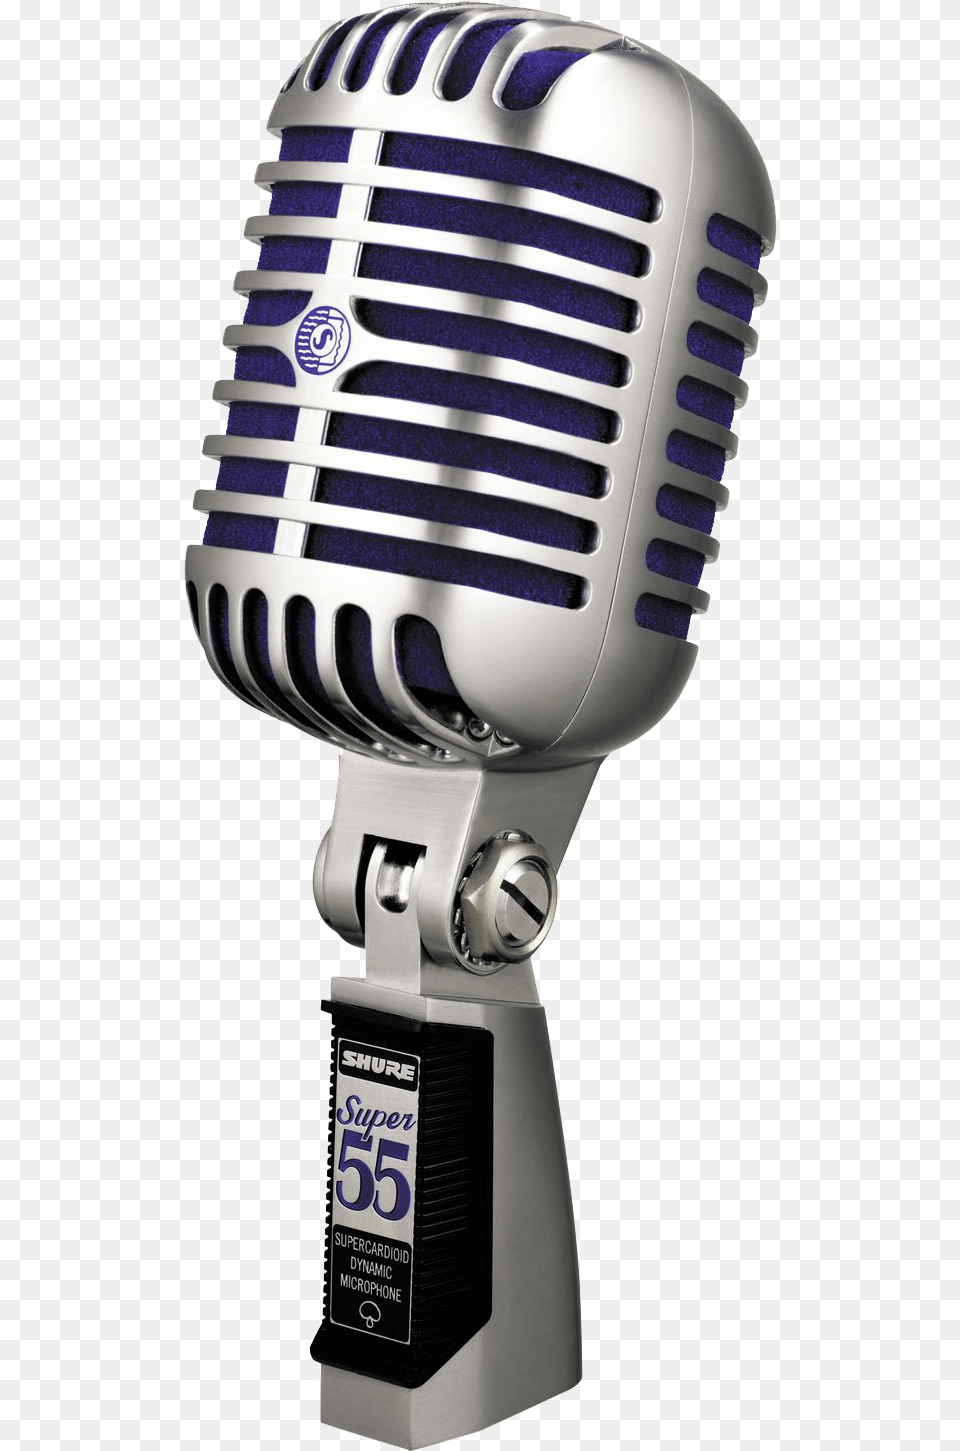 Mic Shure 55 Super, Electrical Device, Microphone, Person Png Image